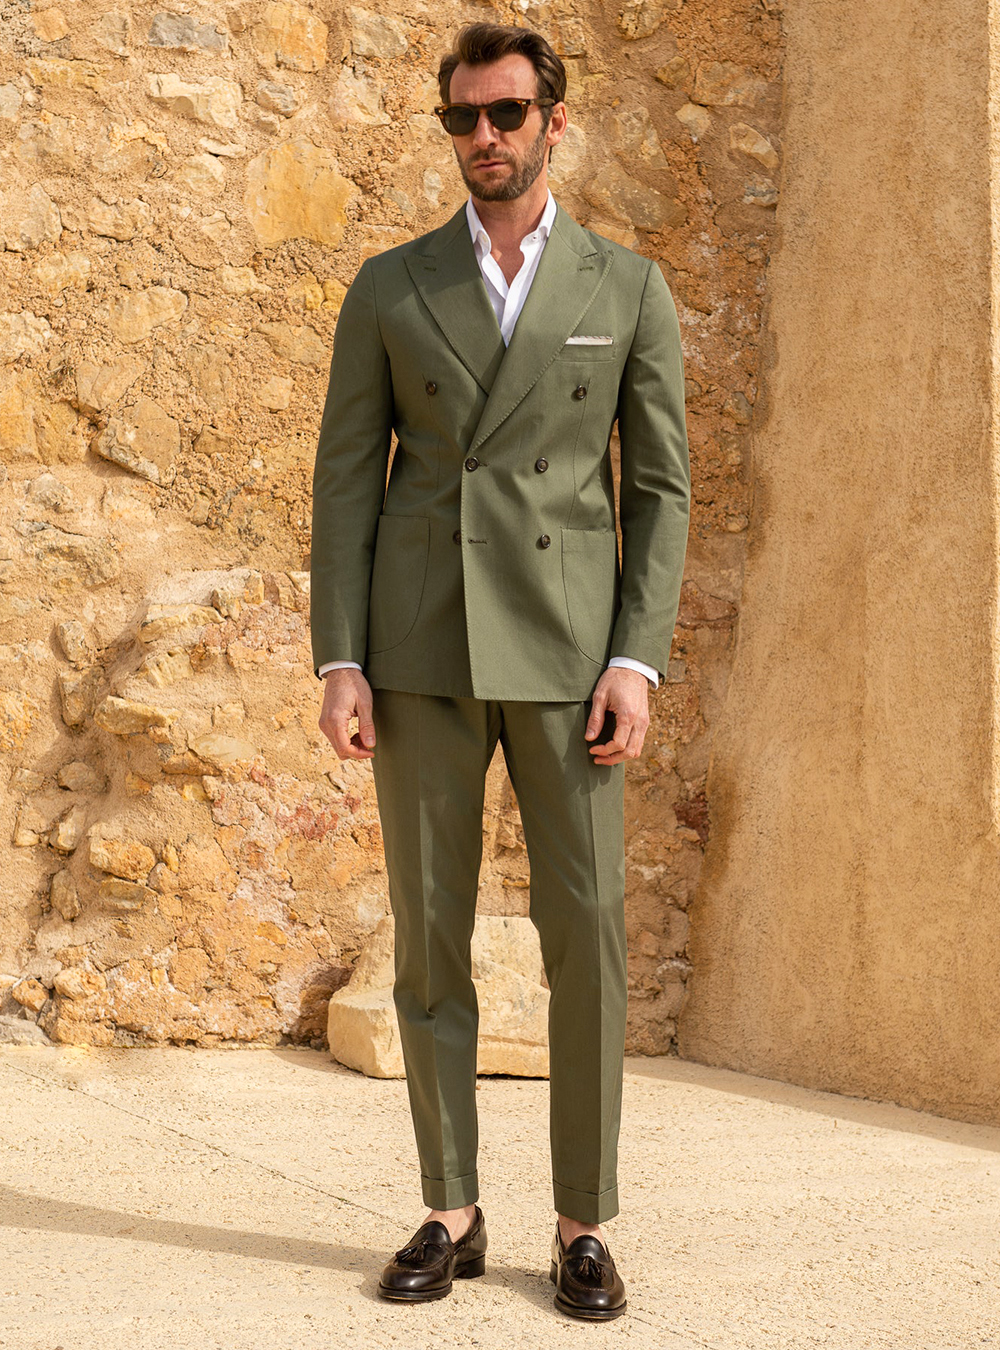 Green double-breasted suit, white dress shirt and brown loafers